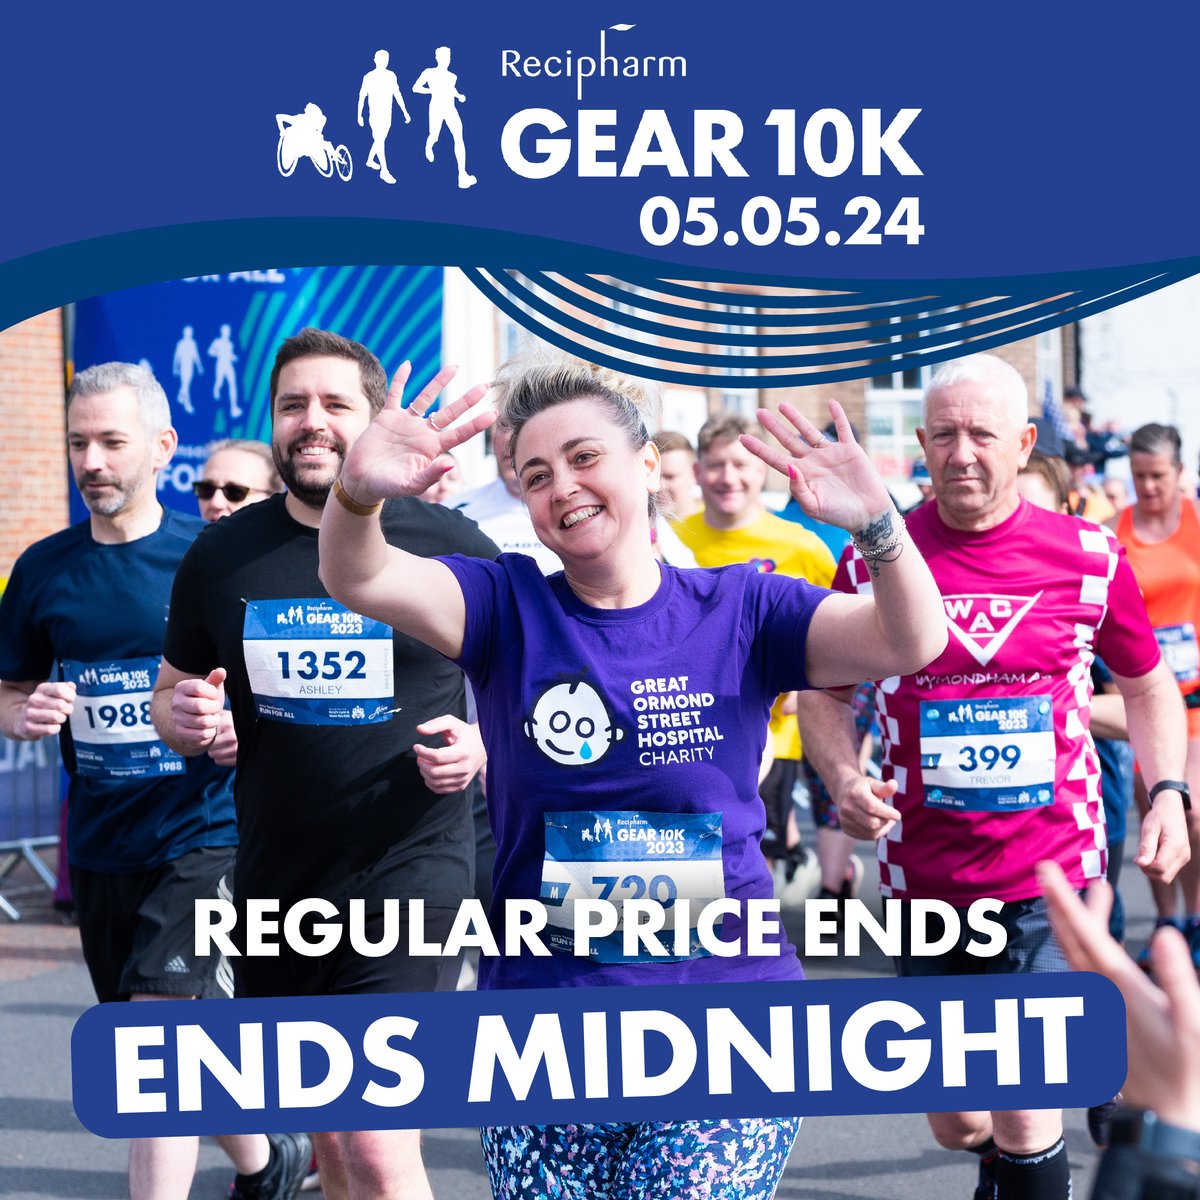 Regular price for Recipharm GEAR 10K ends MIDNIGHT TONIGHT. Secure your discounted ticket💰Sign up by the link in our bio. Will see you at the start line🤩 #runforall #gear10k